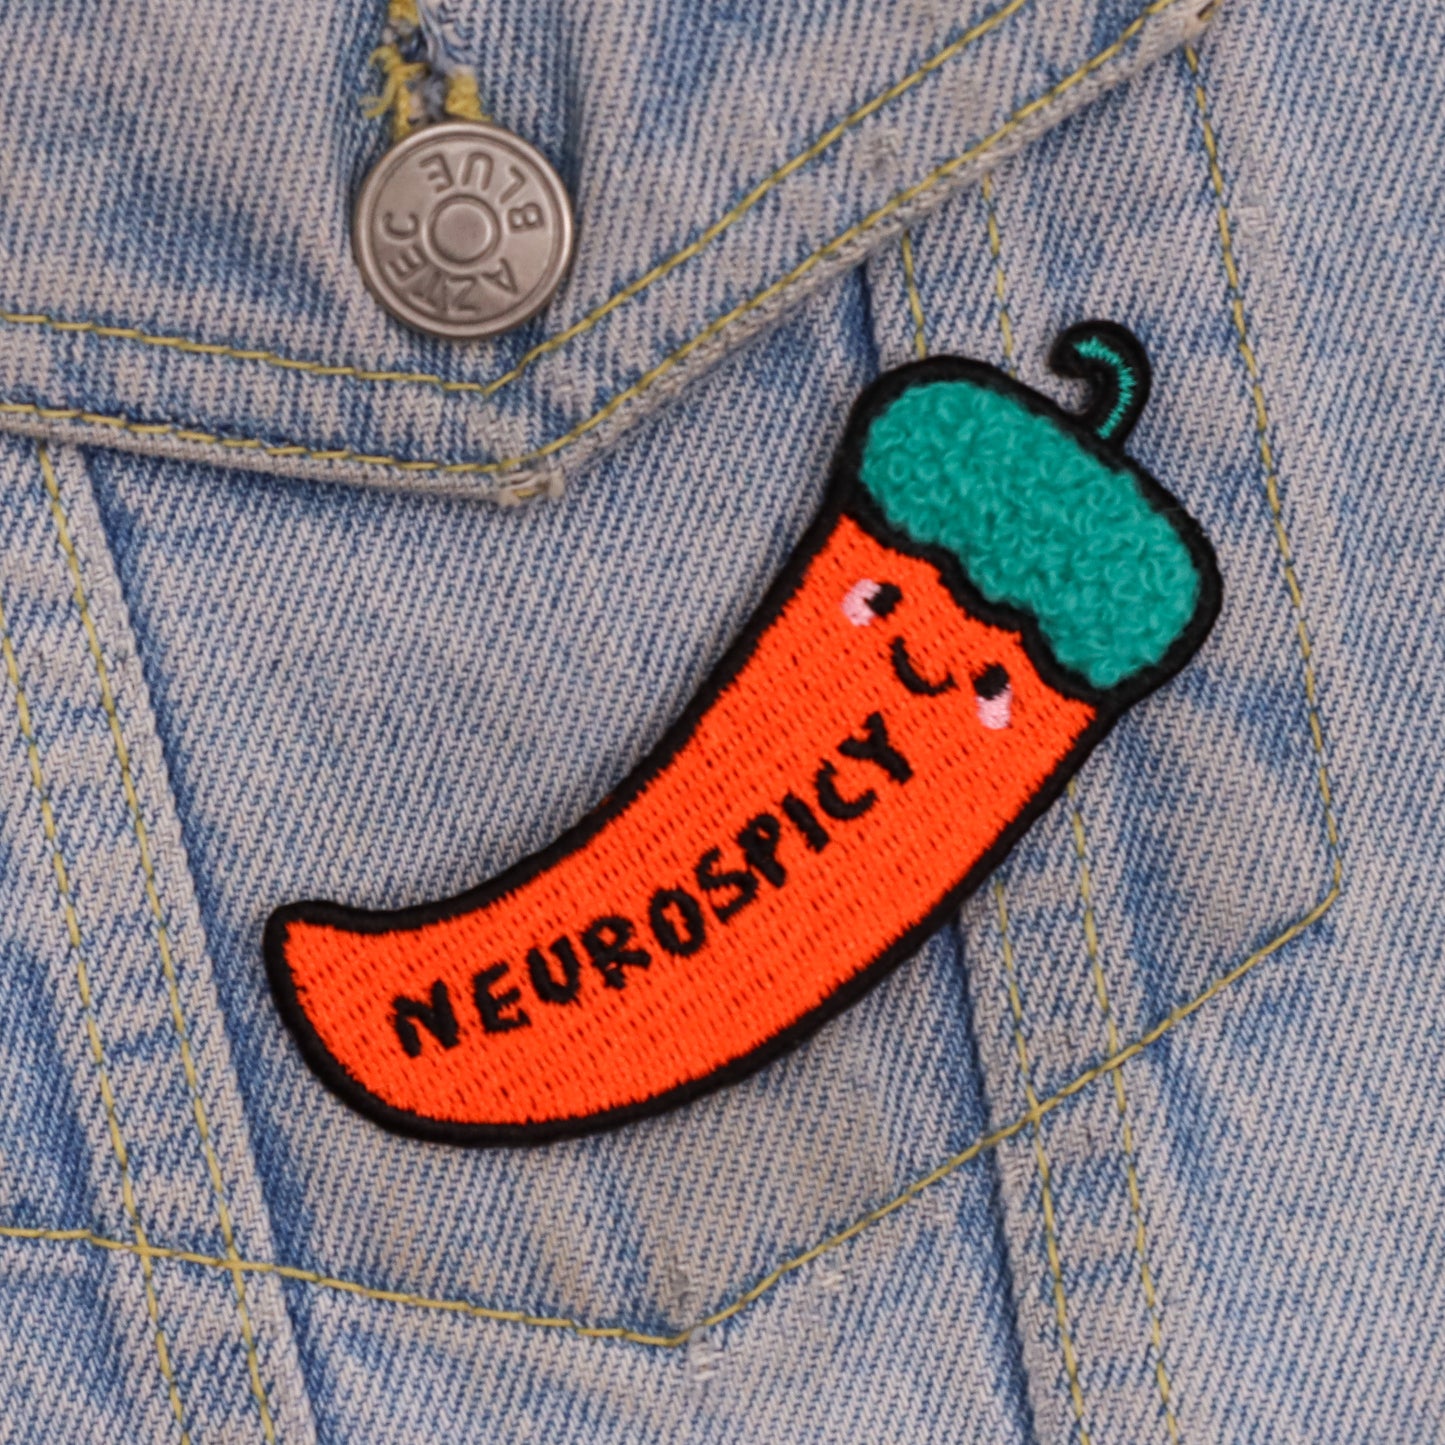 Neurospicy funny neurodivergent embroirdered iron-on patch